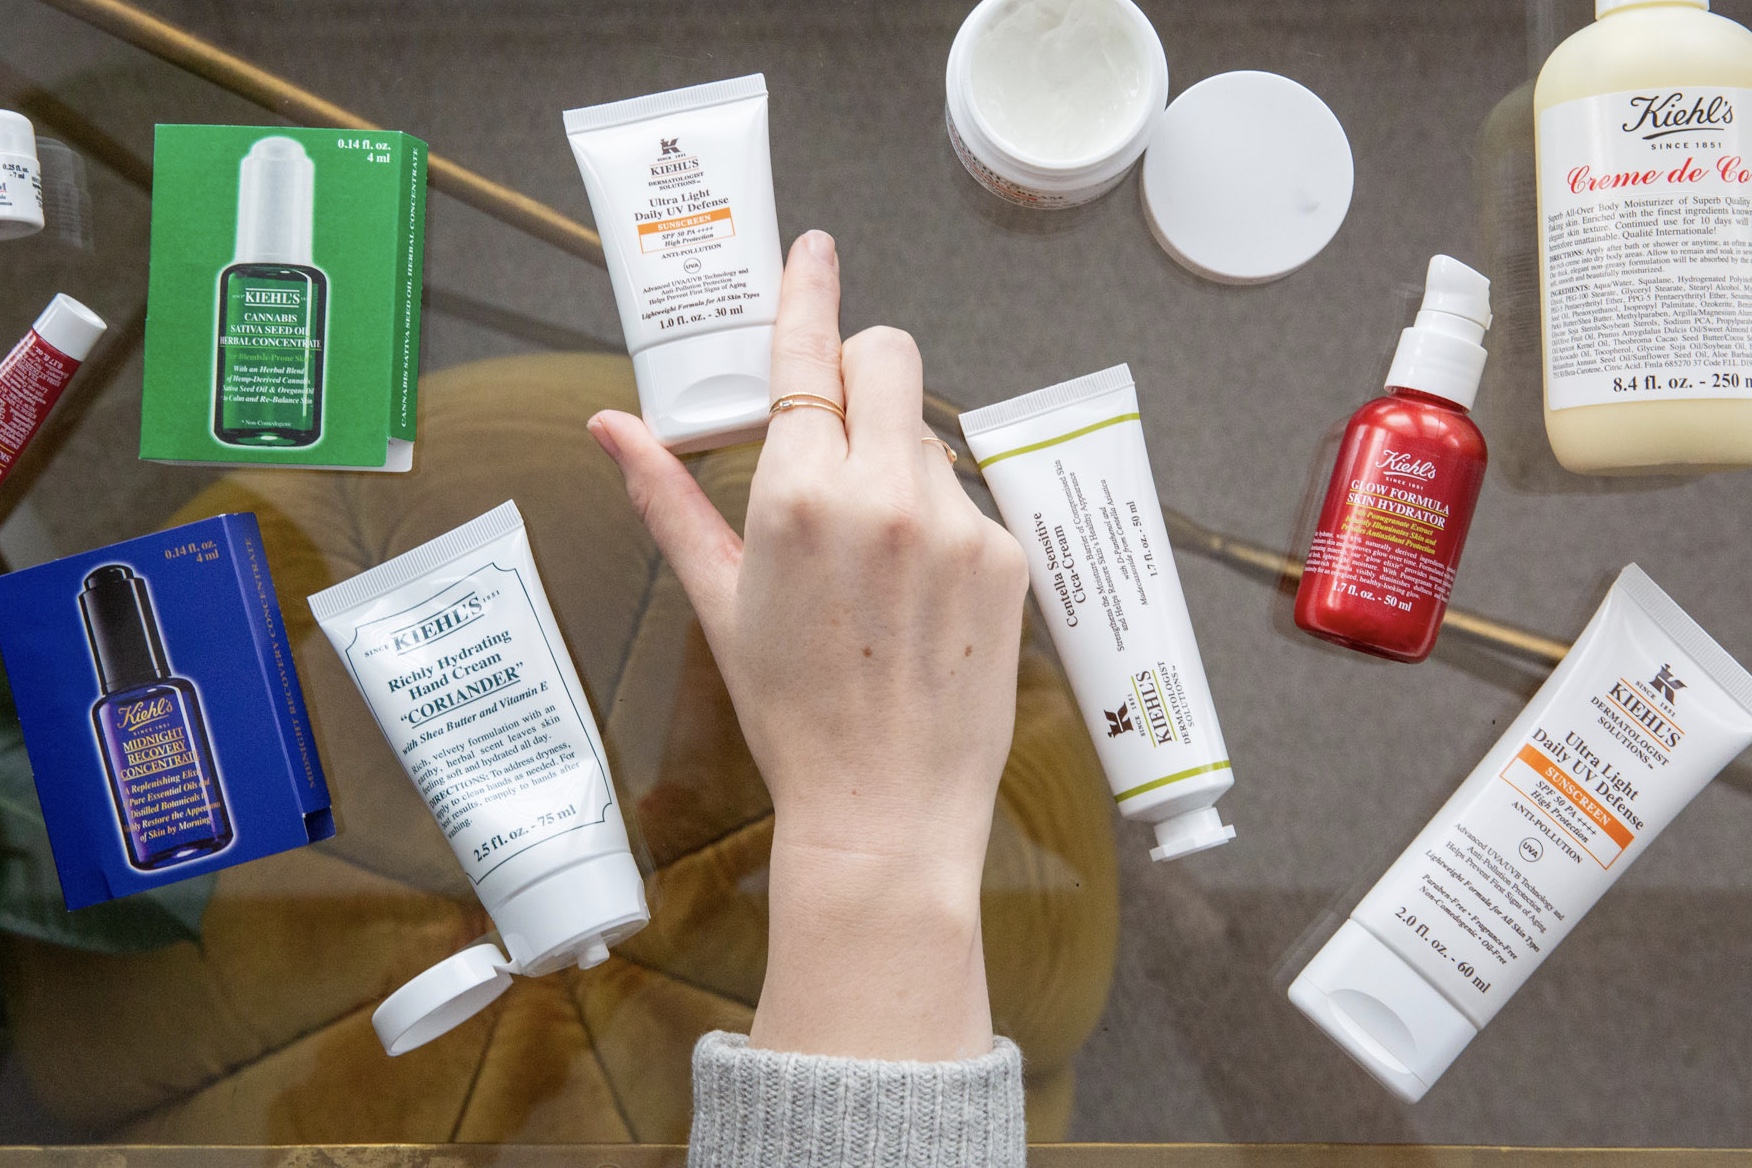 Kiehl's: Everything You Didn't Know About the Skin-Care Brand